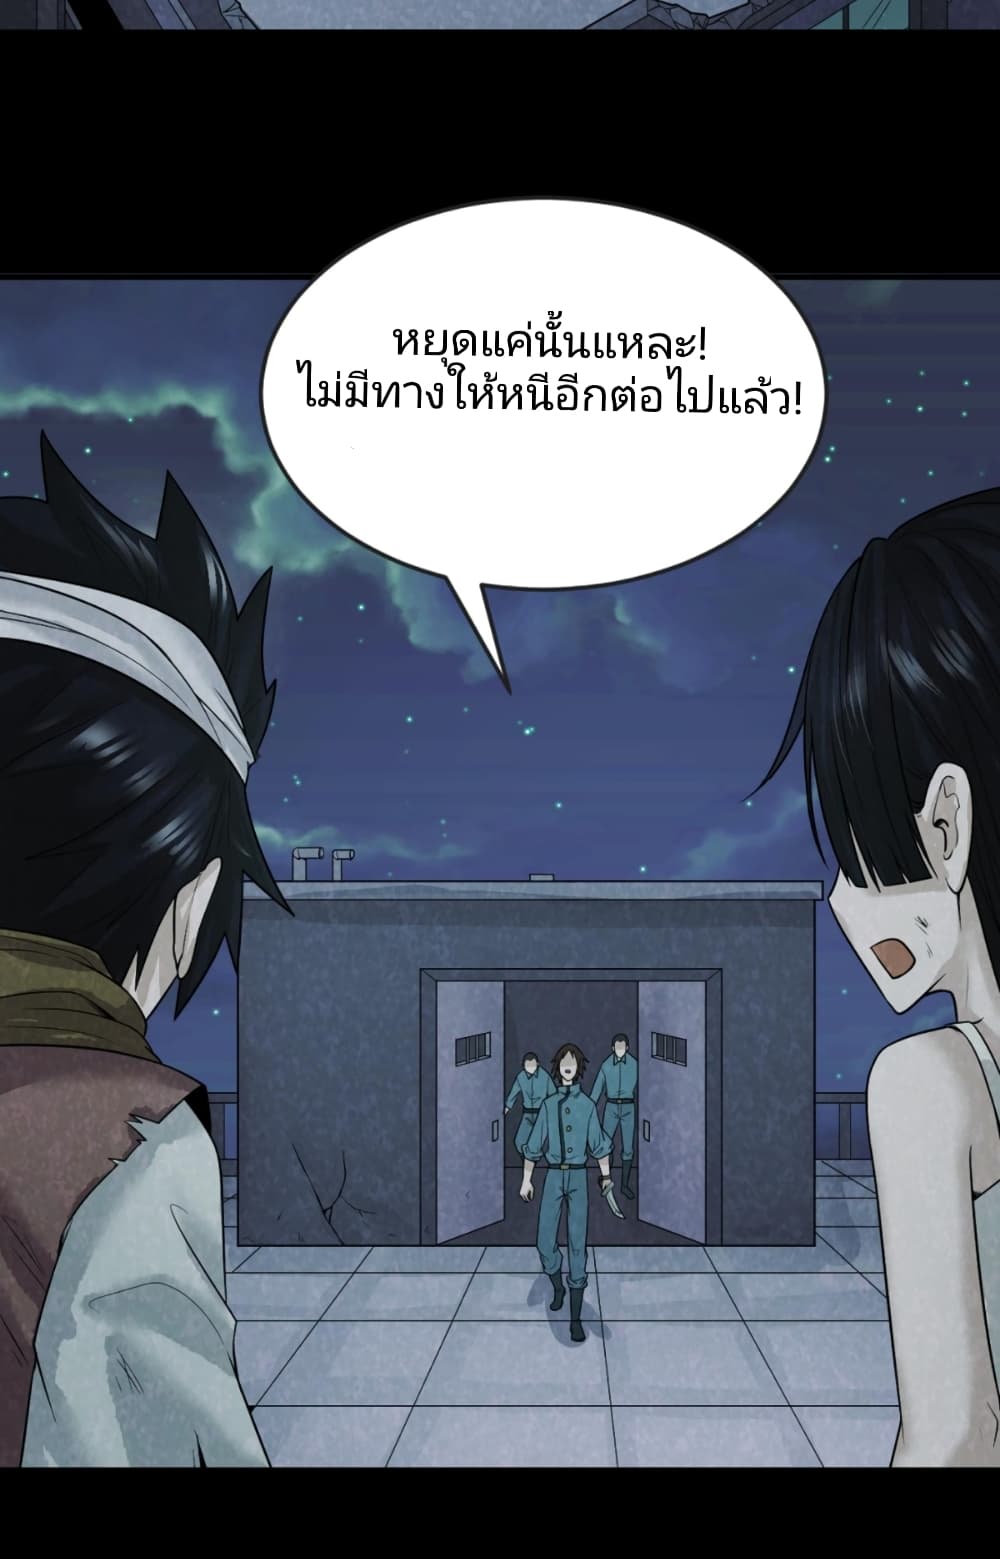 The Age of Ghost Spirits à¸à¸­à¸à¸à¸µà¹ 33 (10)